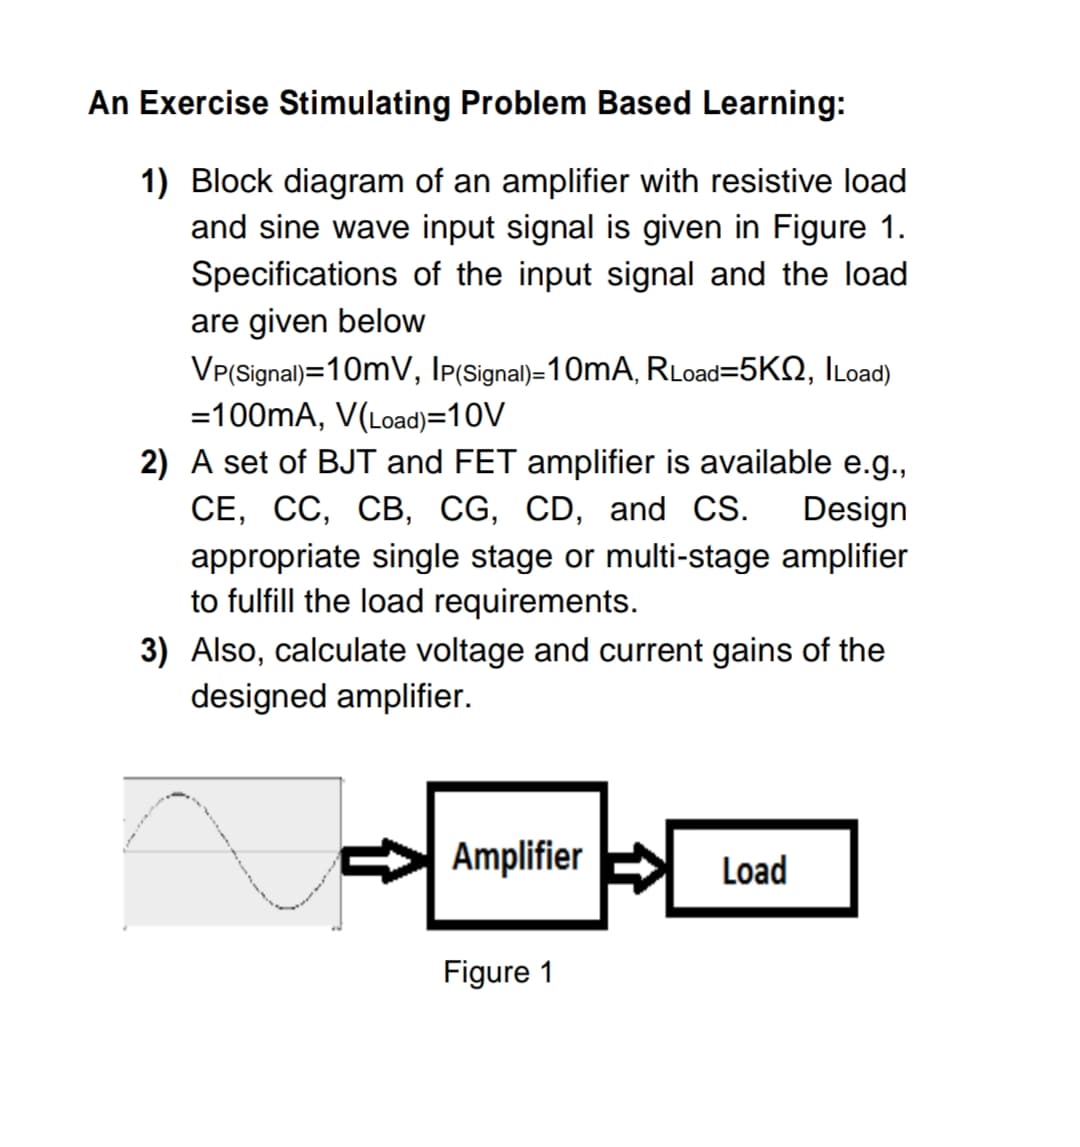 An Exercise Stimulating Problem Based Learning:
1) Block diagram of an amplifier with resistive load
and sine wave input signal is given in Figure 1.
Specifications of the input signal and the load
are given below
VP(Signal)=10mV, Ip(Signal)=10mA, RLoad=5KQ, ILoad)
=100mA, V(Load)=10V
2) A set of BJT and FET amplifier is available e.g.,
СЕ, СС, СВ, CG, CD, and CS.
Design
appropriate single stage or multi-stage amplifier
to fulfill the load requirements.
3) Also, calculate voltage and current gains of the
designed amplifier.
Amplifier
Load
Figure 1
